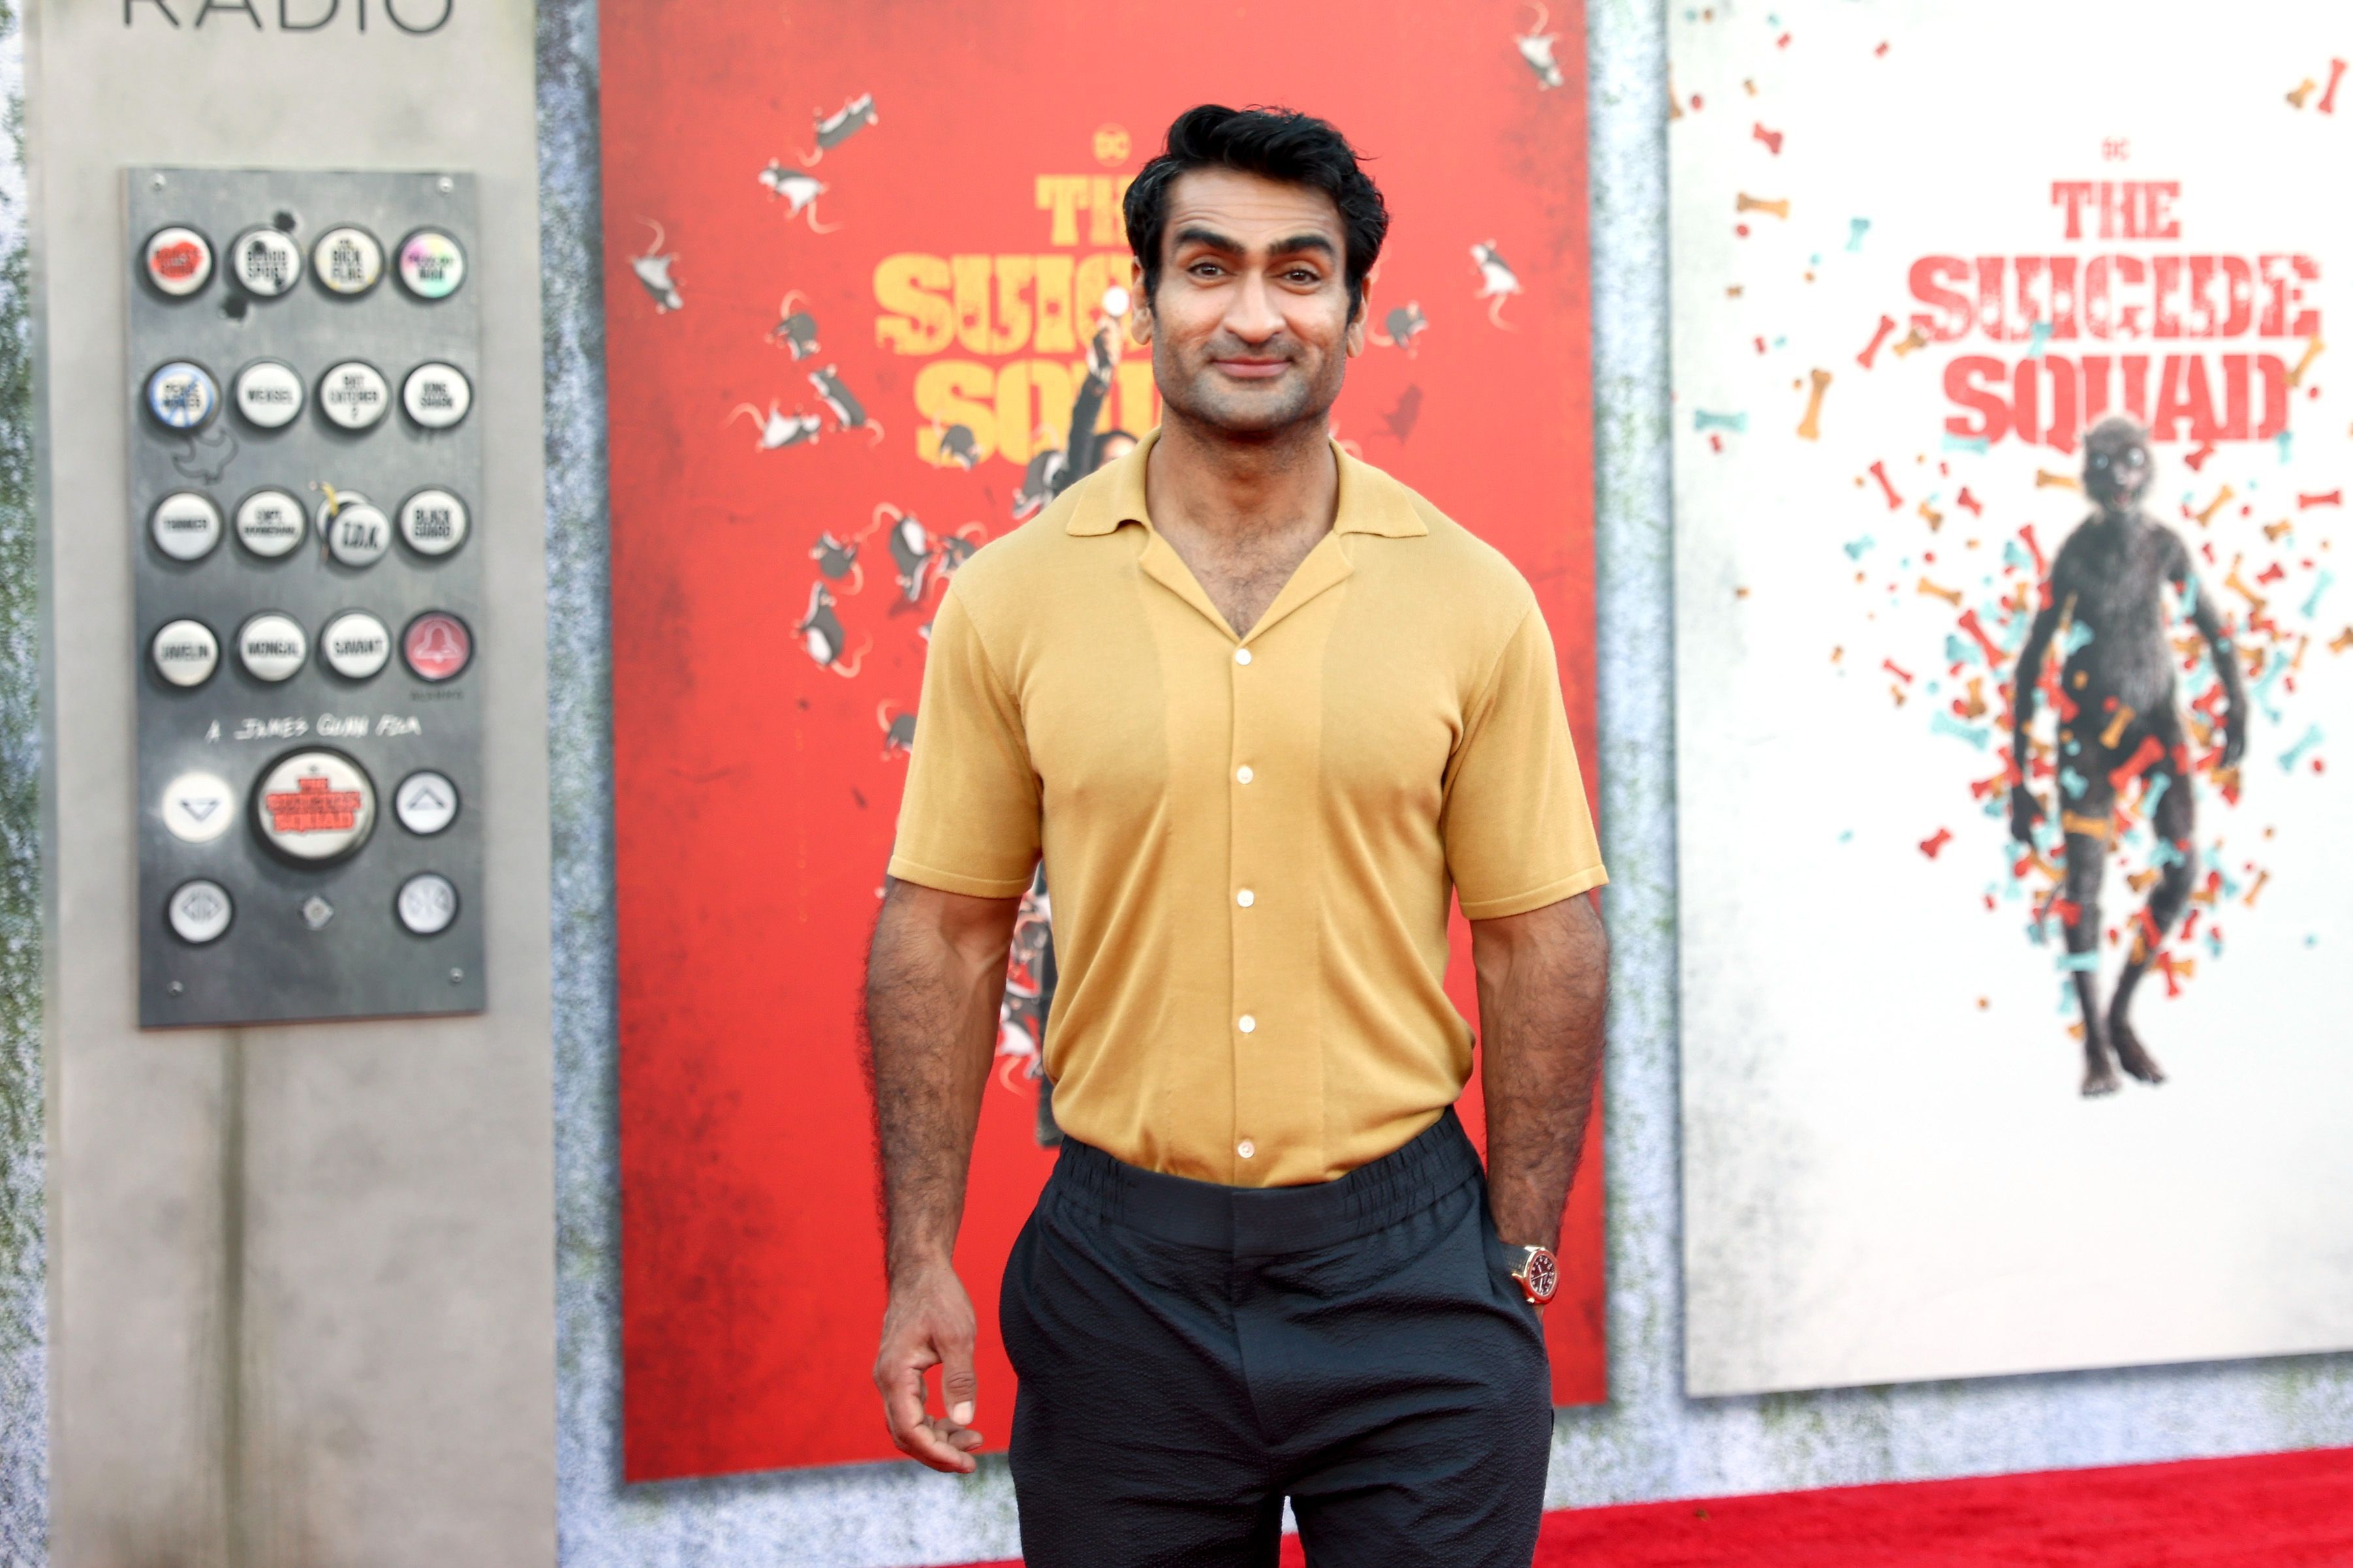 LOS ANGELES, CALIFORNIA - AUGUST 02: Kumail Nanjiani attends the Warner Bros. premiere of "The Suicide Squad" at Regency Village Theatre on August 02, 2021 in Los Angeles, California.